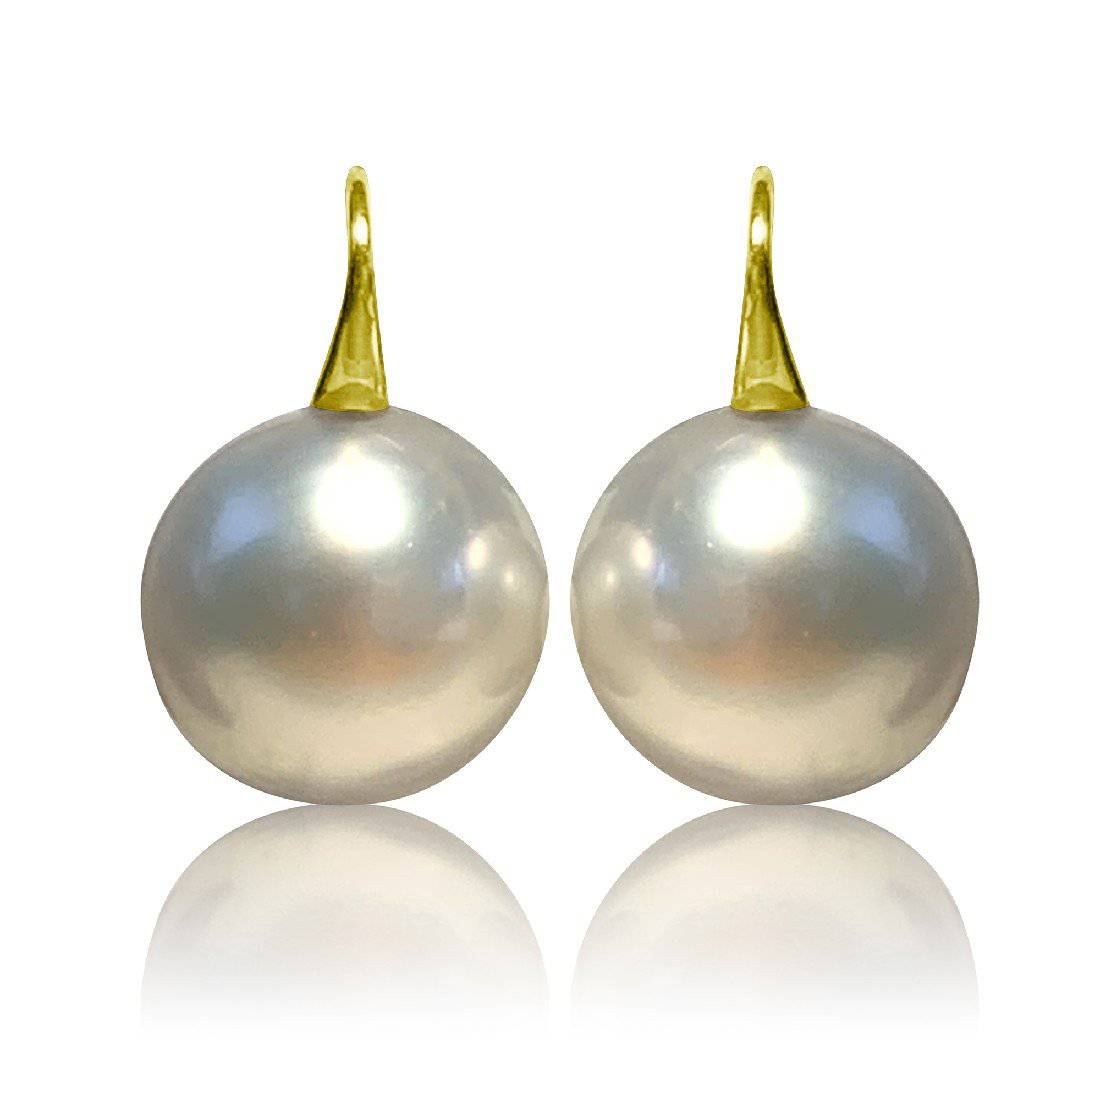 How to choose Pearls?